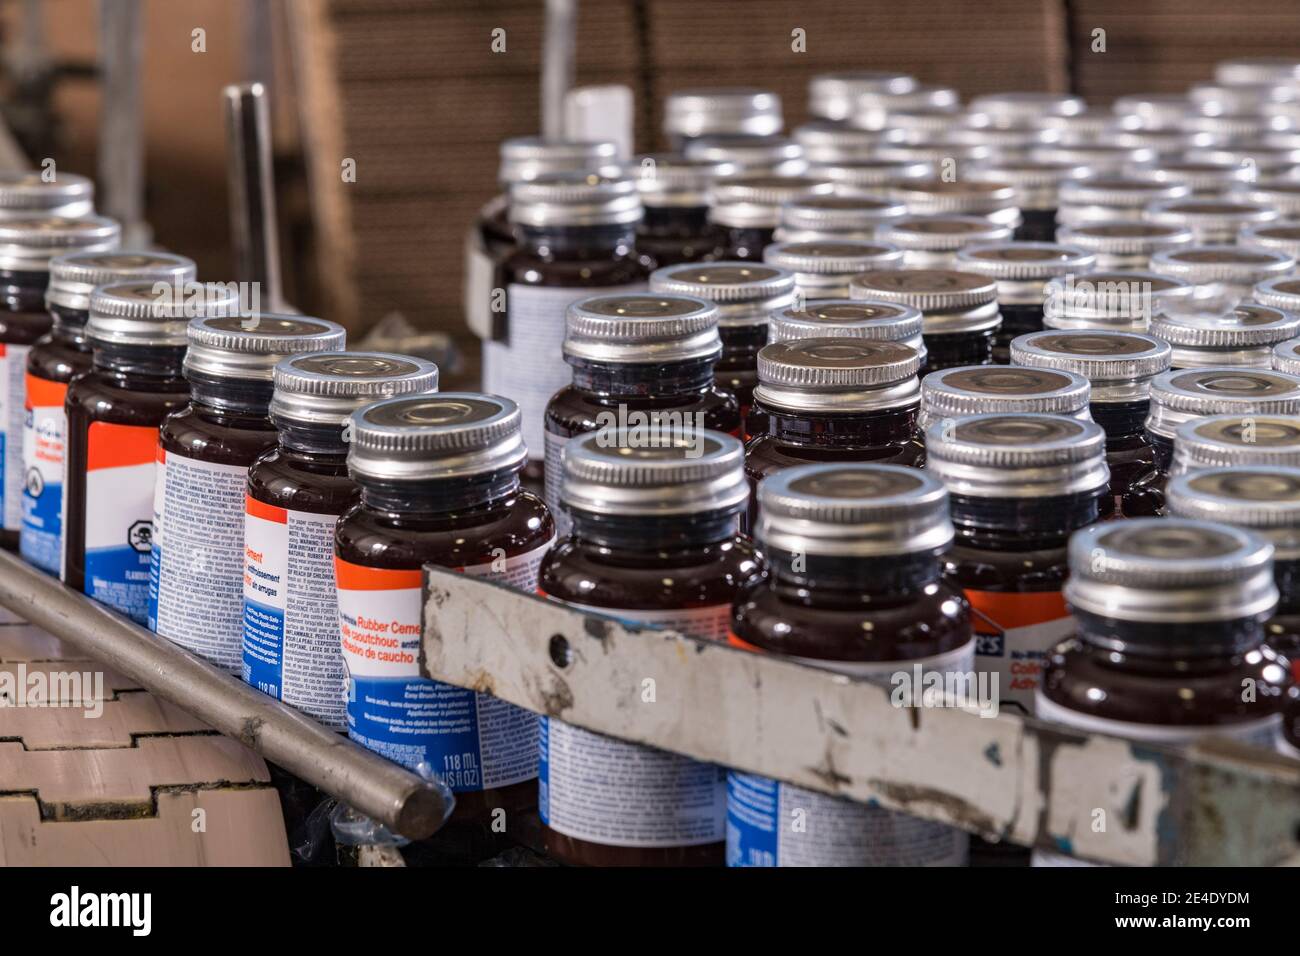 Glue bottles being filled and packaged, Philadelphia, USA Stock Photo